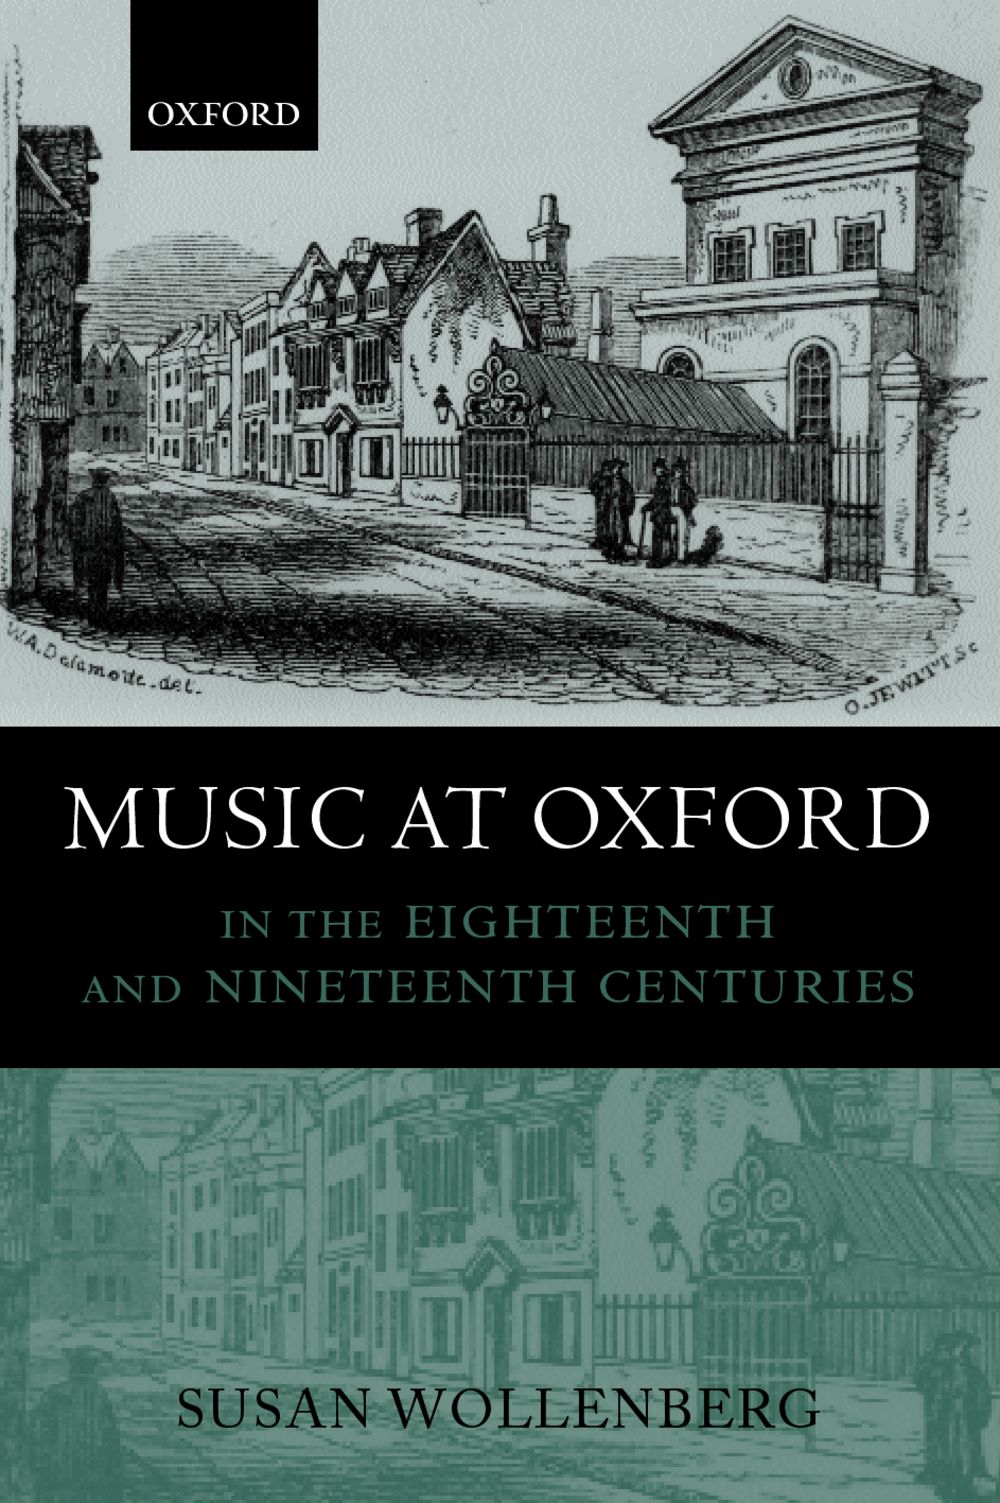 Music at Oxford in the 18th and 19th Centuries